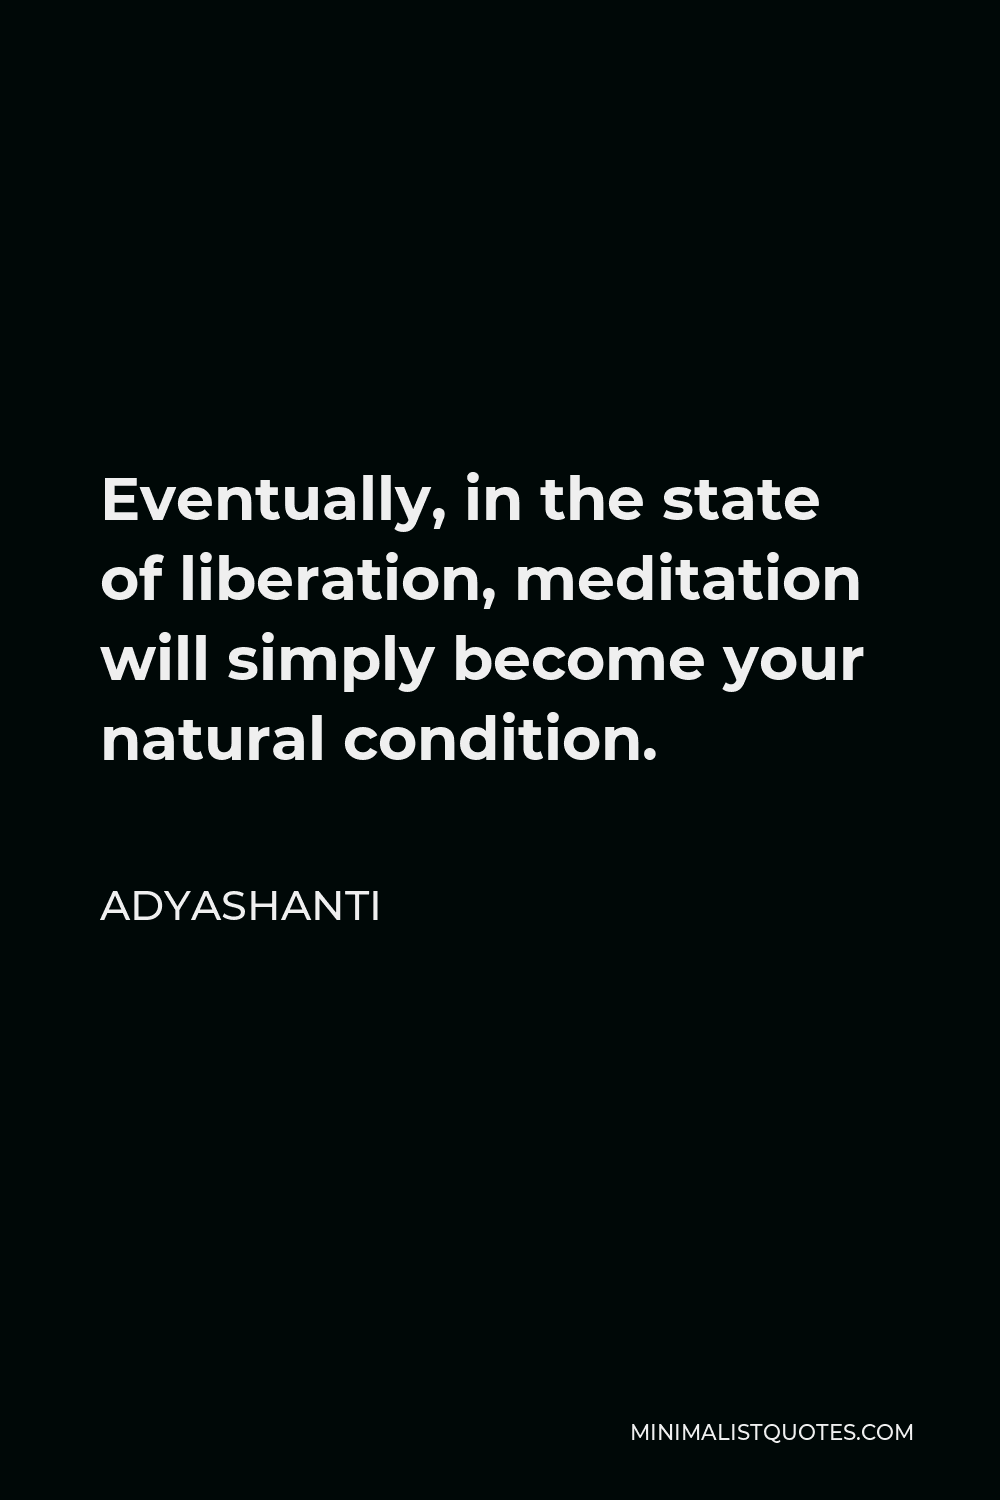 Adyashanti Quote - Eventually, in the state of liberation, meditation will simply become your natural condition.